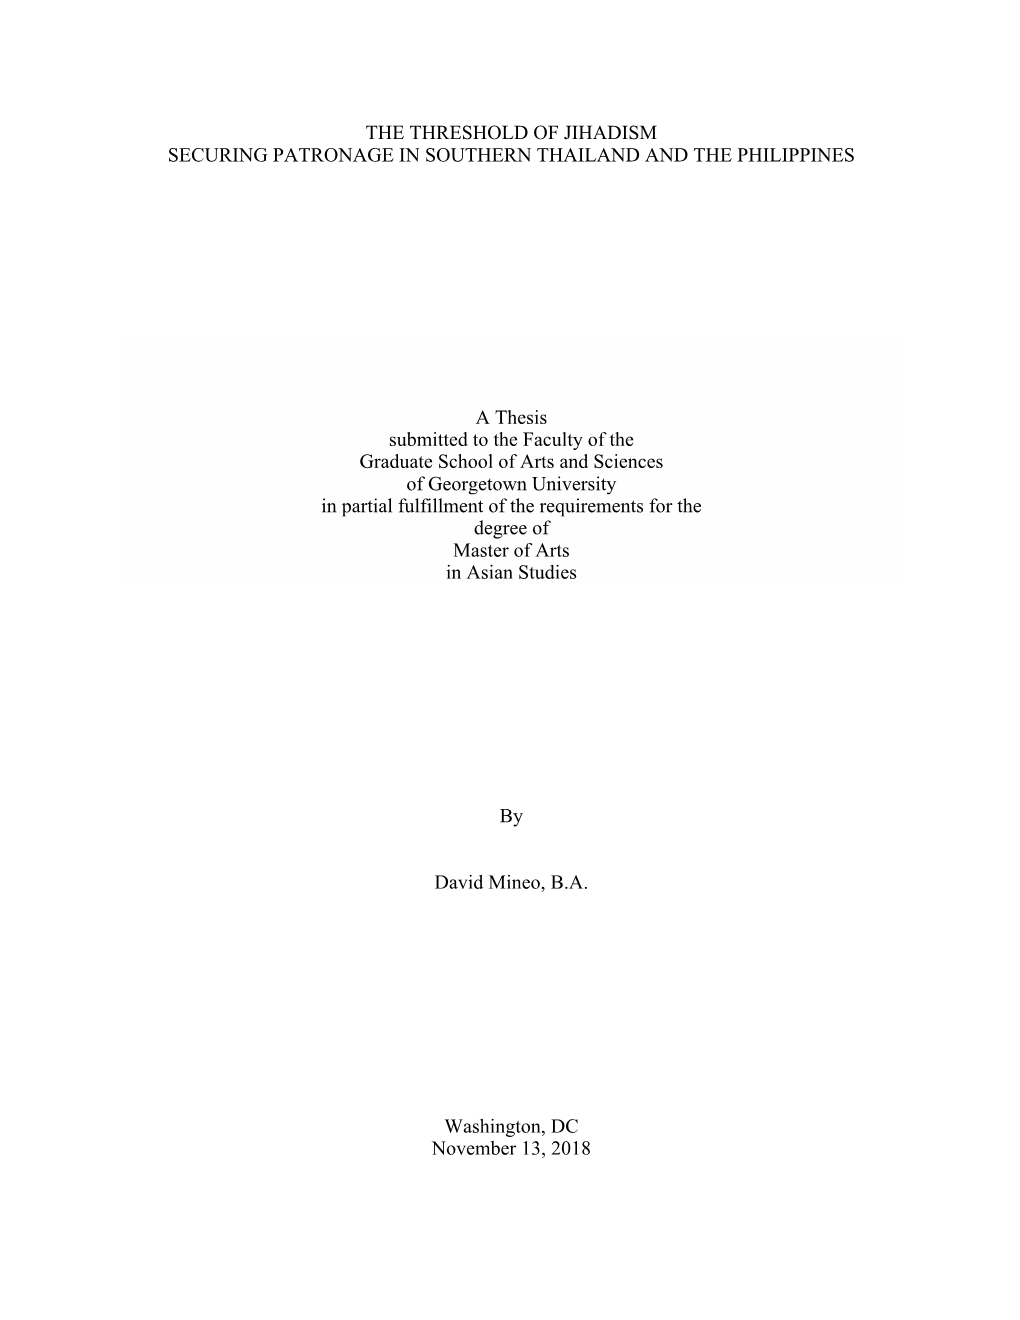 THE THRESHOLD of JIHADISM SECURING PATRONAGE in SOUTHERN THAILAND and the PHILIPPINES a Thesis Submitted to the Faculty of the G